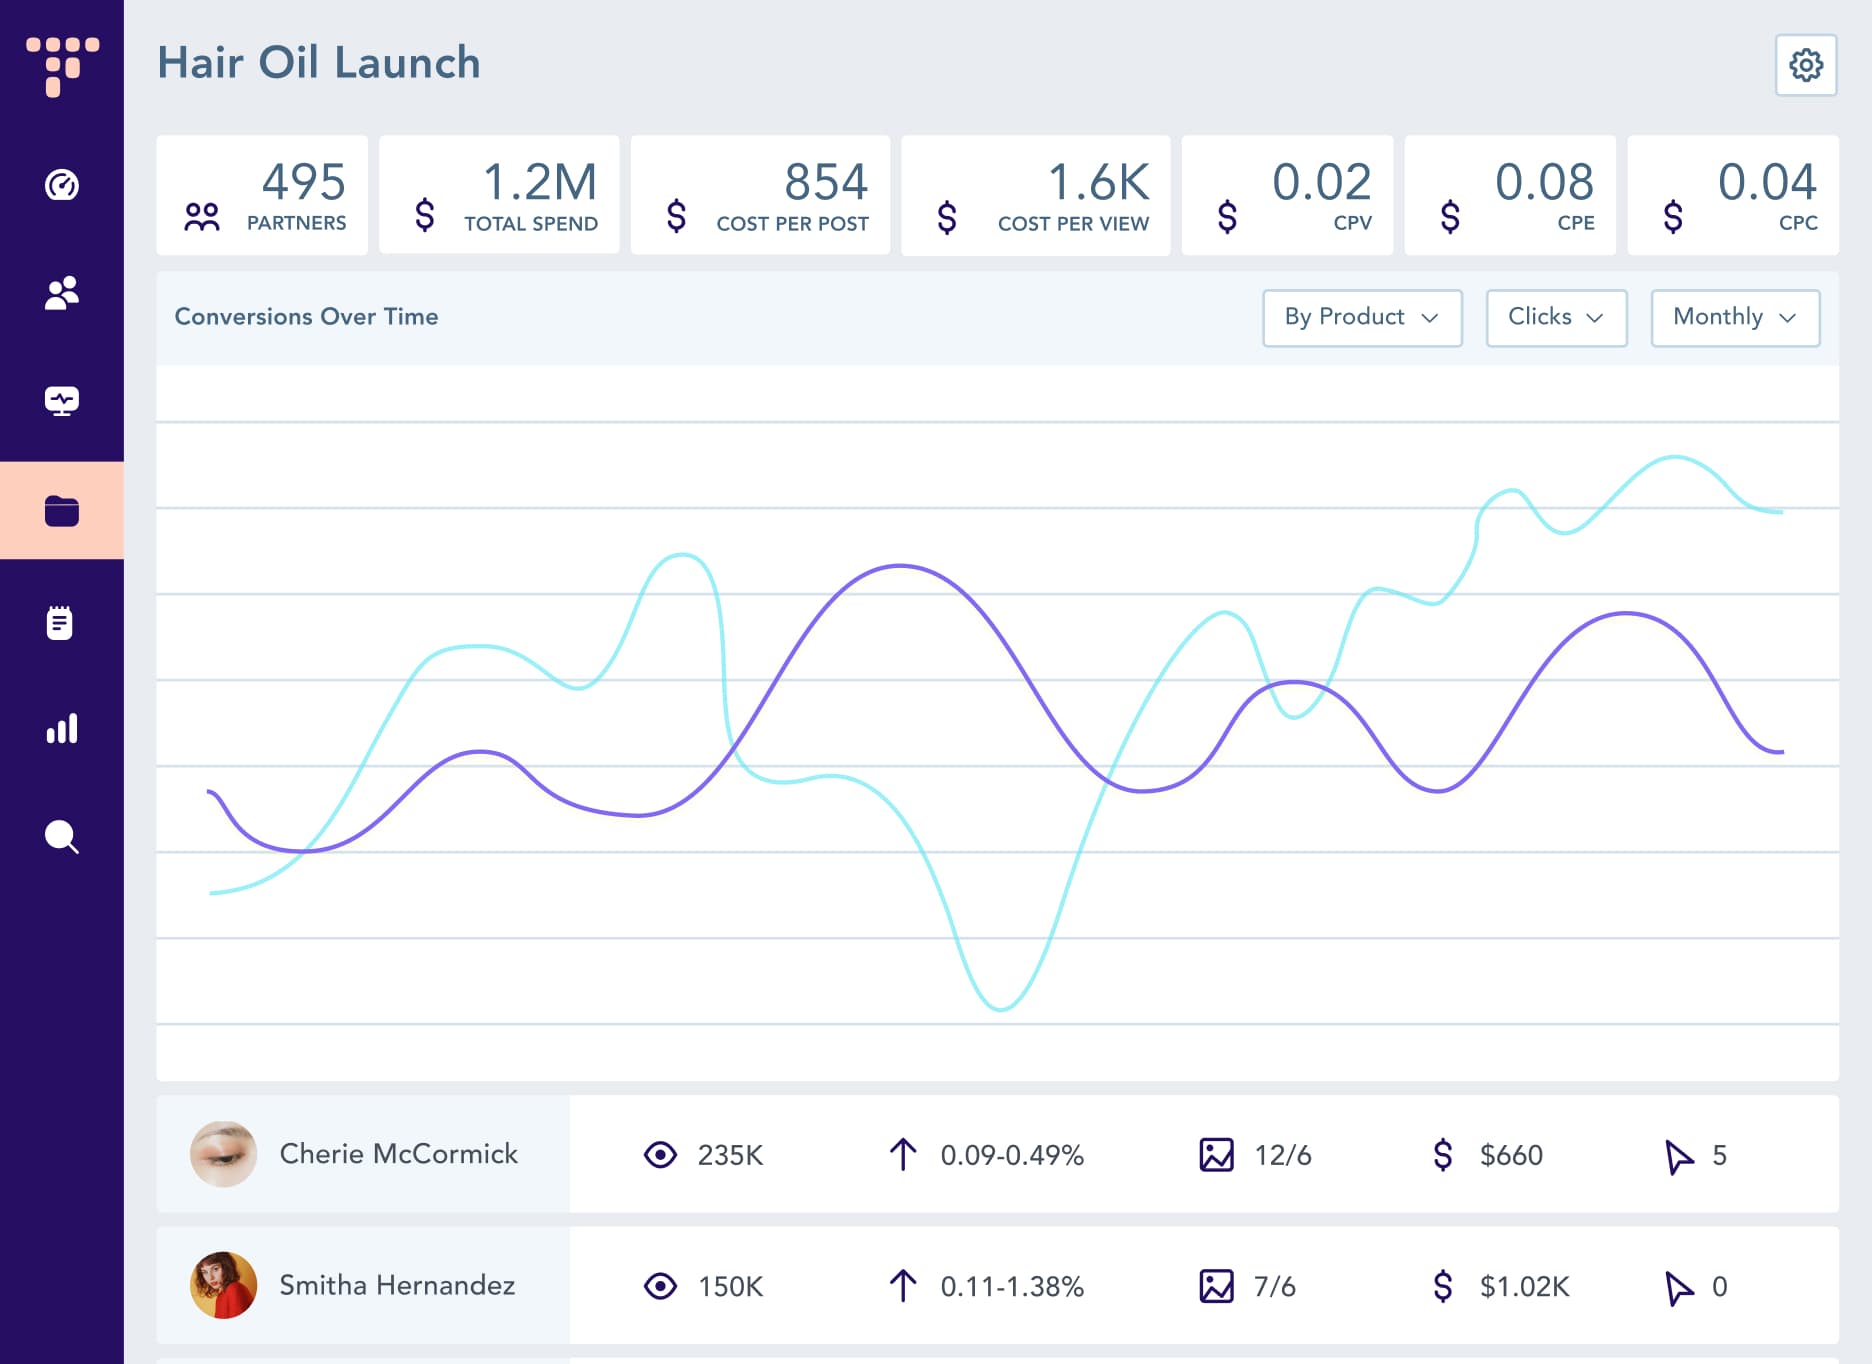 Traackr page shows campaign metrics for a product launch, including total spend, CPV, CPC, and more.